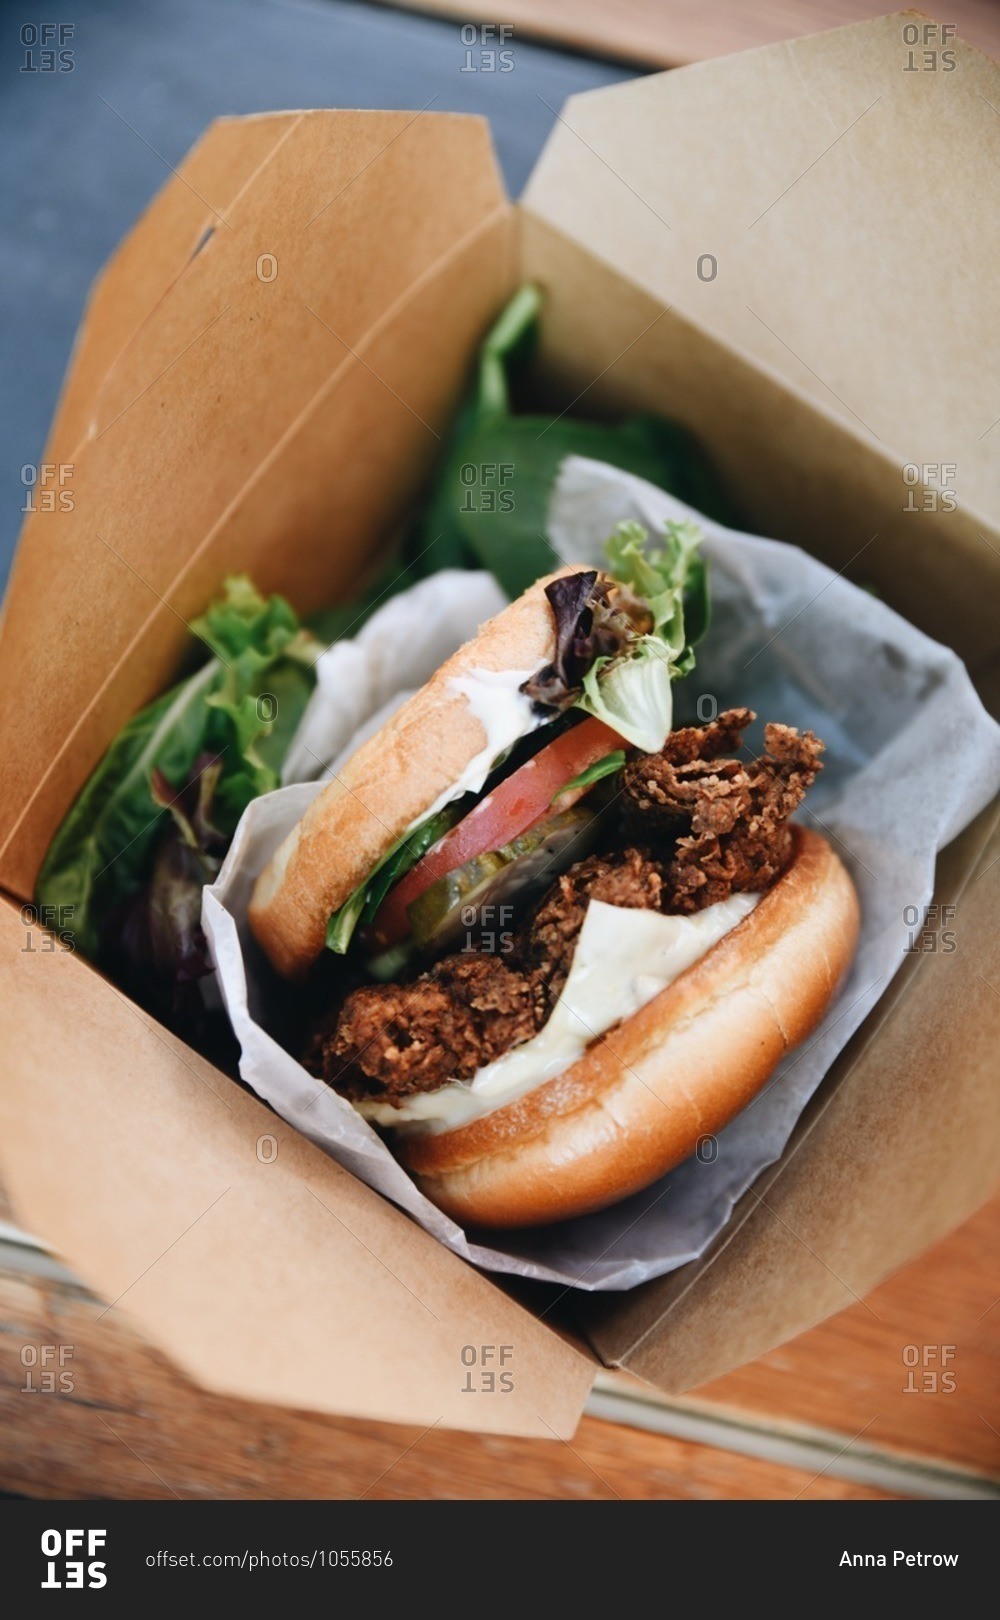 Fried chicken sandwich in a box from a take-out restaurant